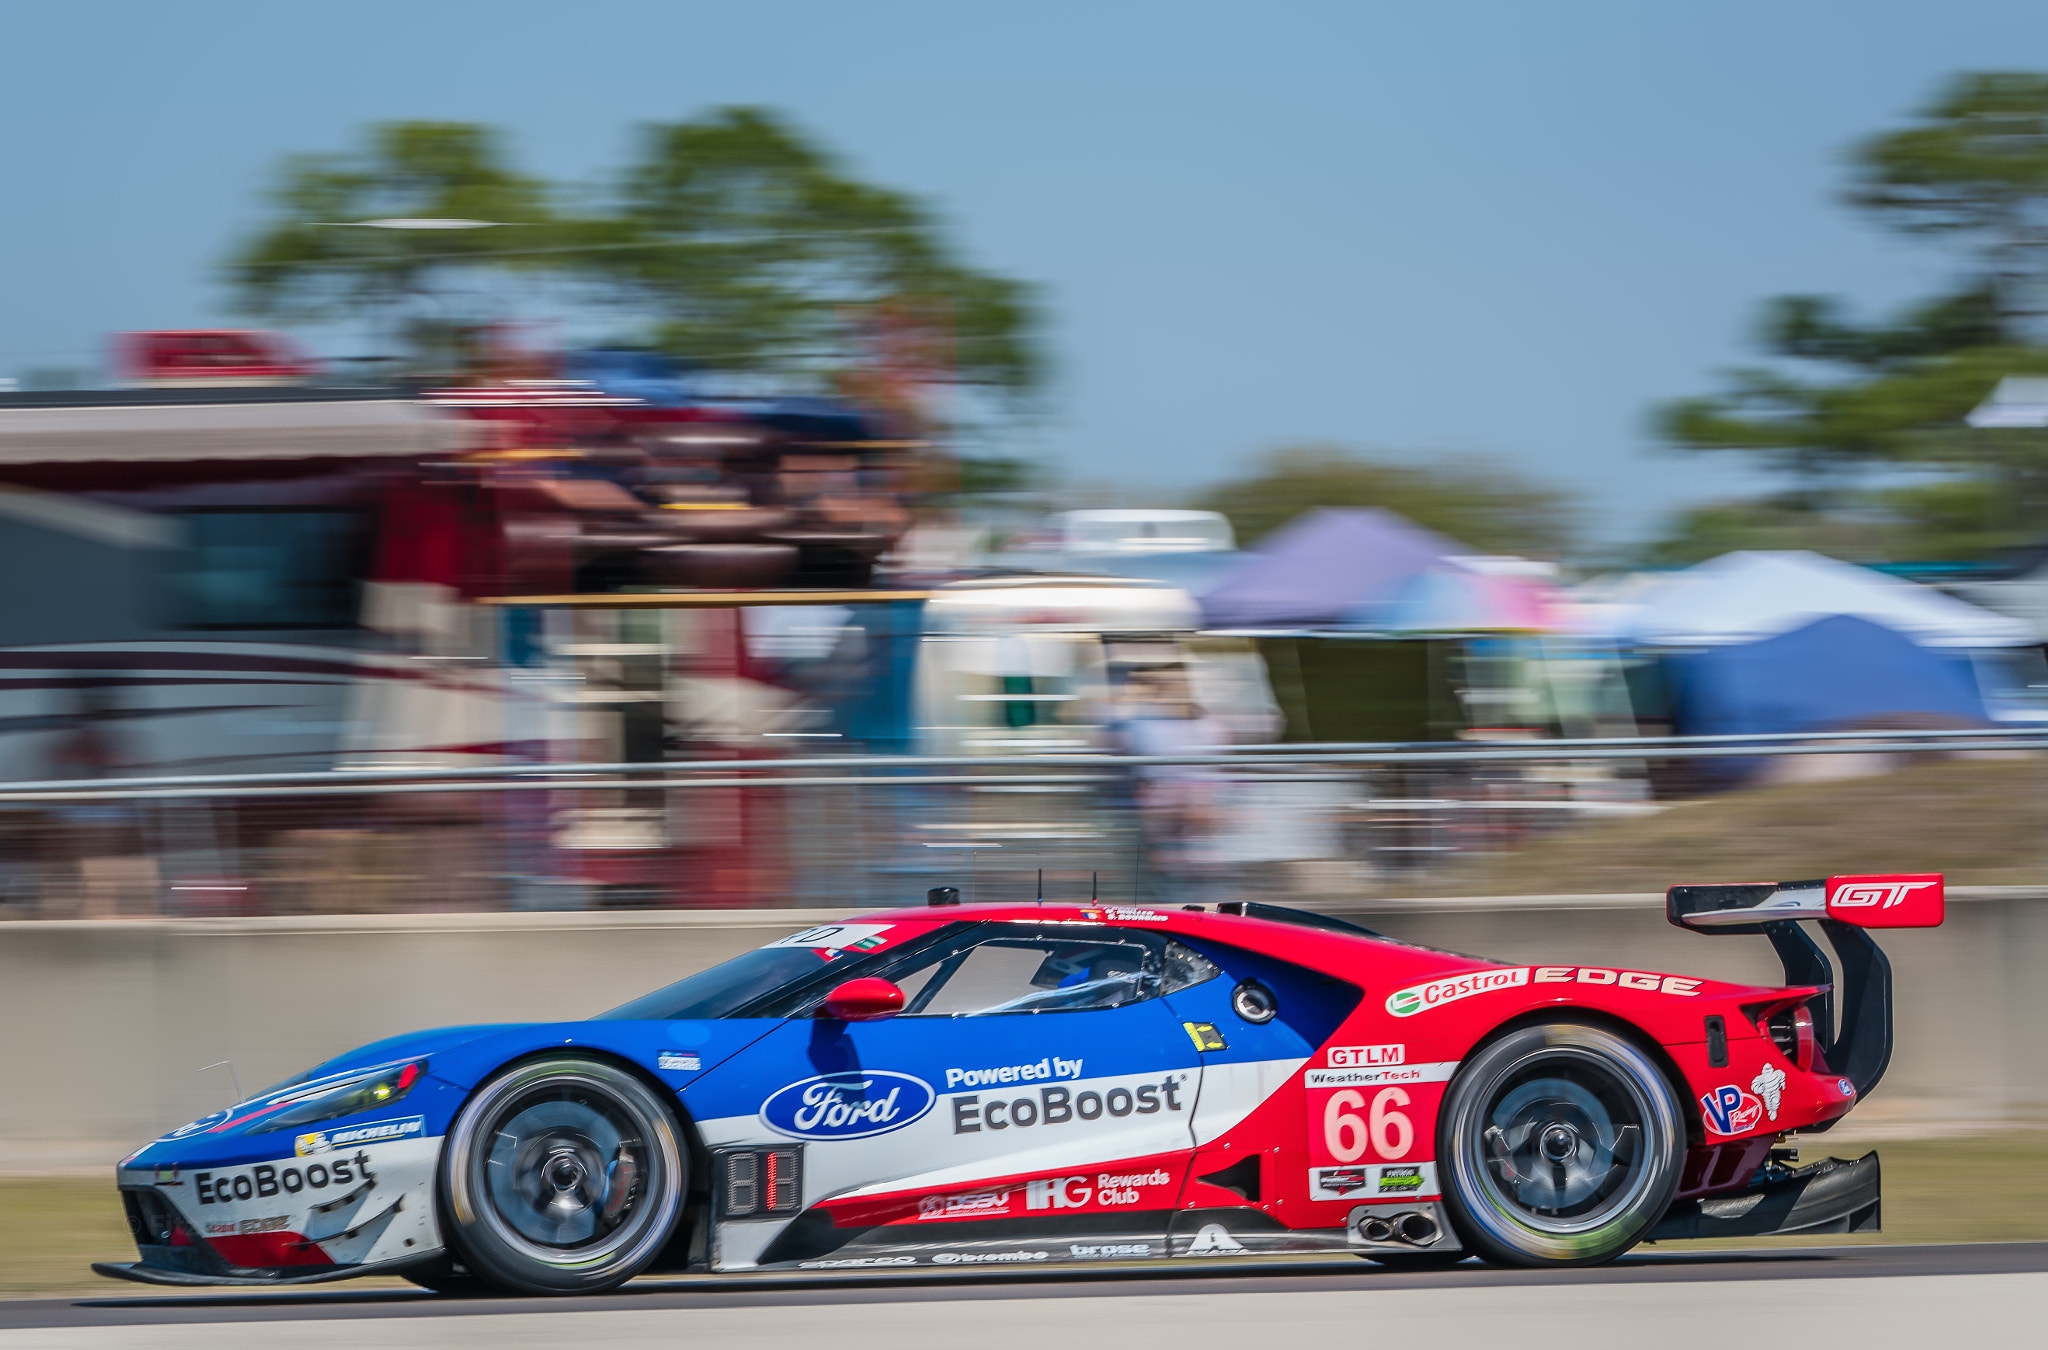 Sony a7R II + Sony FE 70-300mm F4.5-5.6 G OSS sample photo. Ford 12 hr of sebring photography